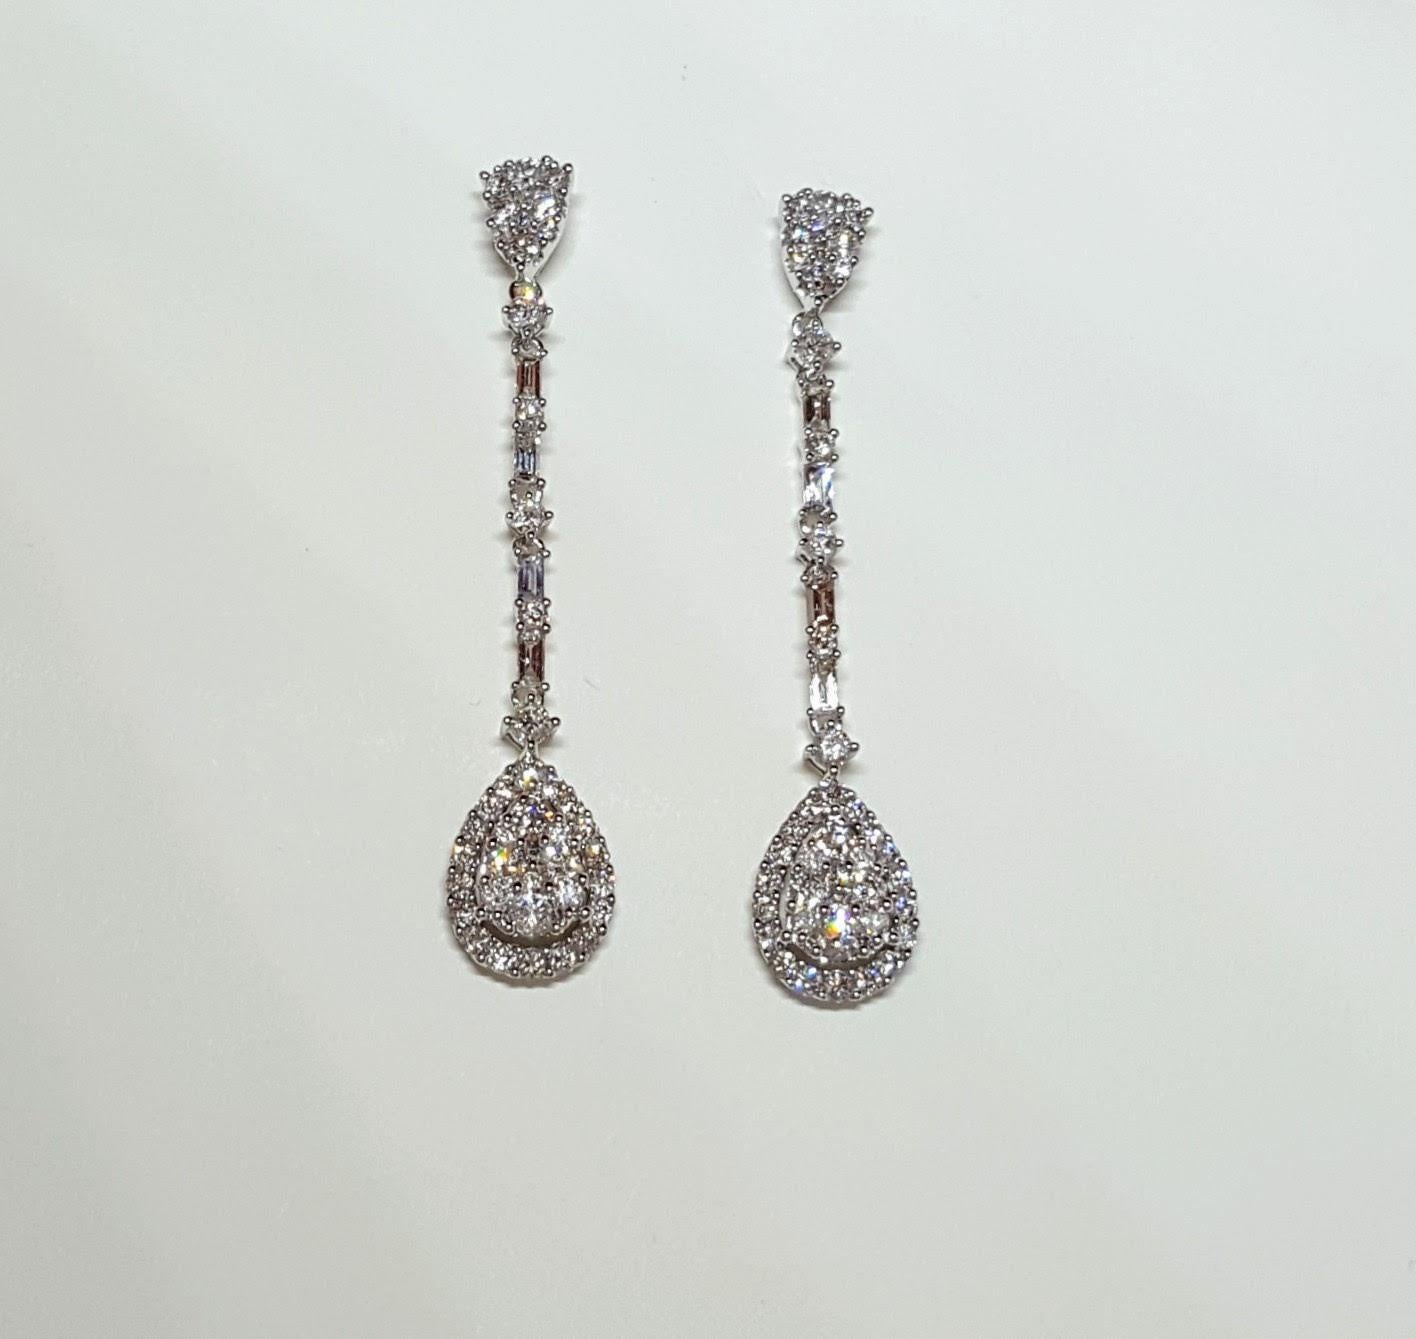 These Round and Baguette Diamond Drop Earrings are made in 14 karat White Gold, set with natural, colourless diamonds. With a total diamond carat weight (approximate) of 1.95 carats, The Diamonds are G colour, VS clarity. One of a Kind, ready to